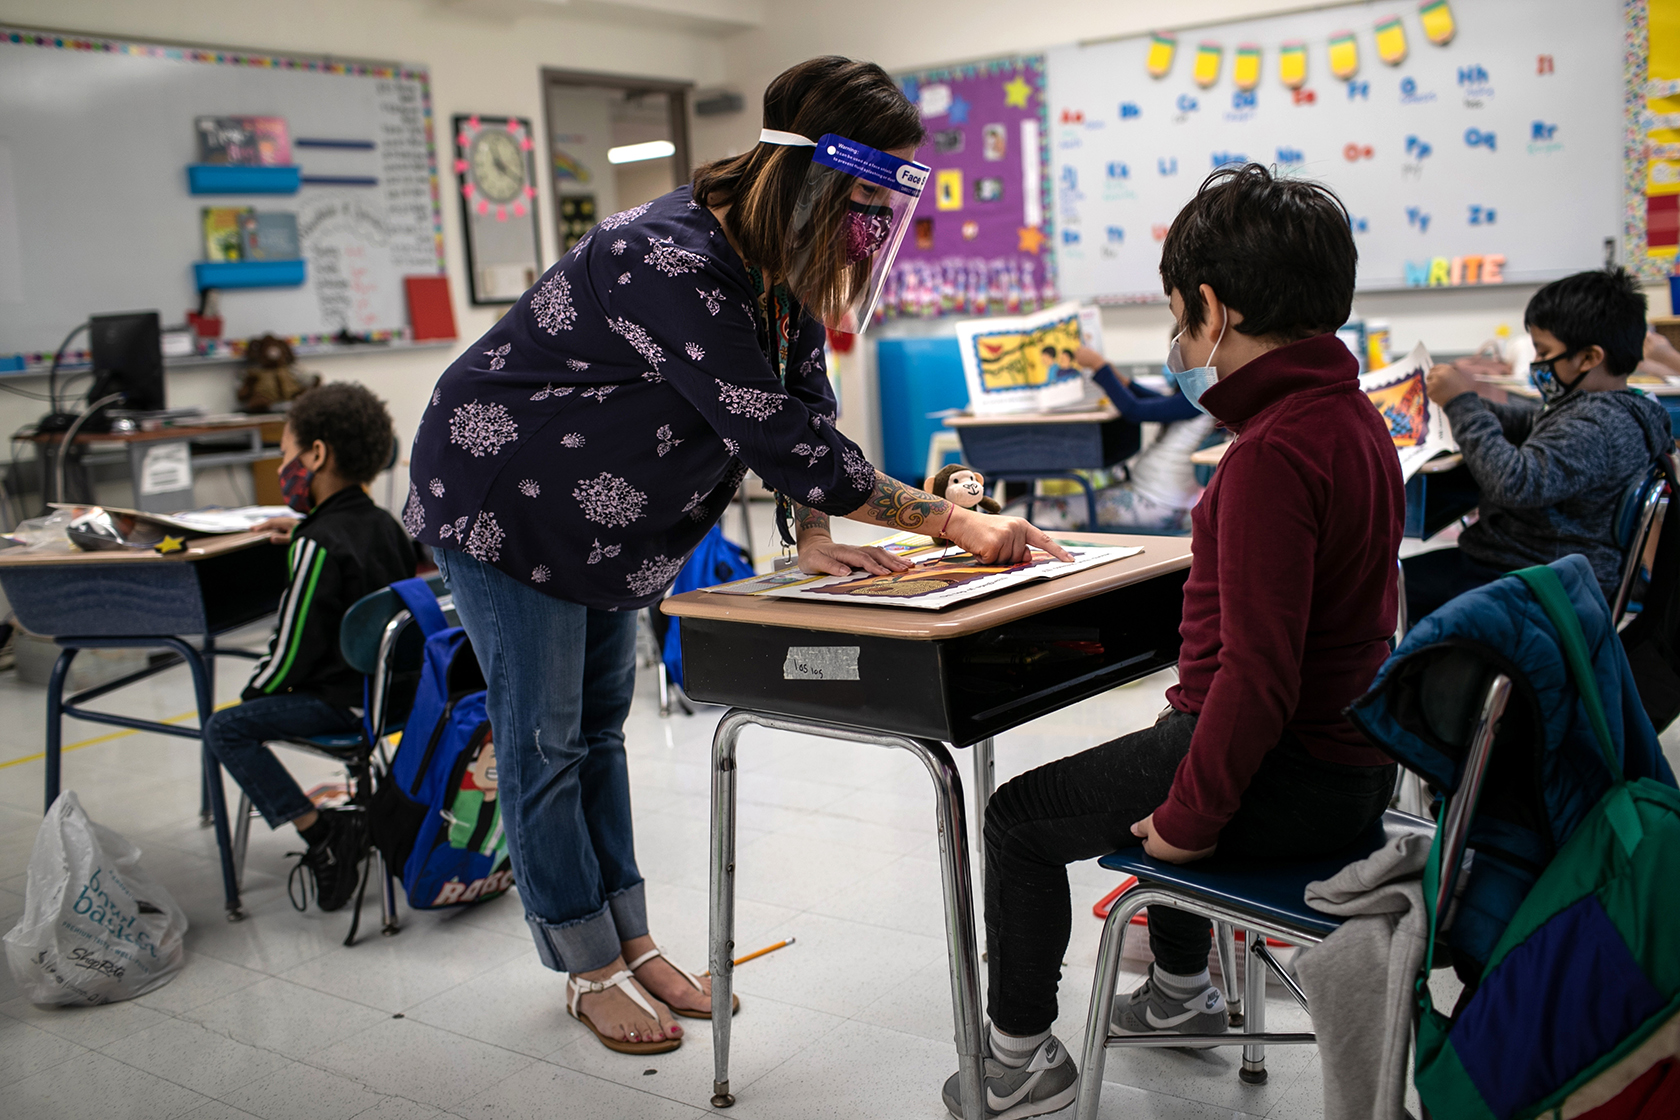 Teacher standing while helping student seated at desk